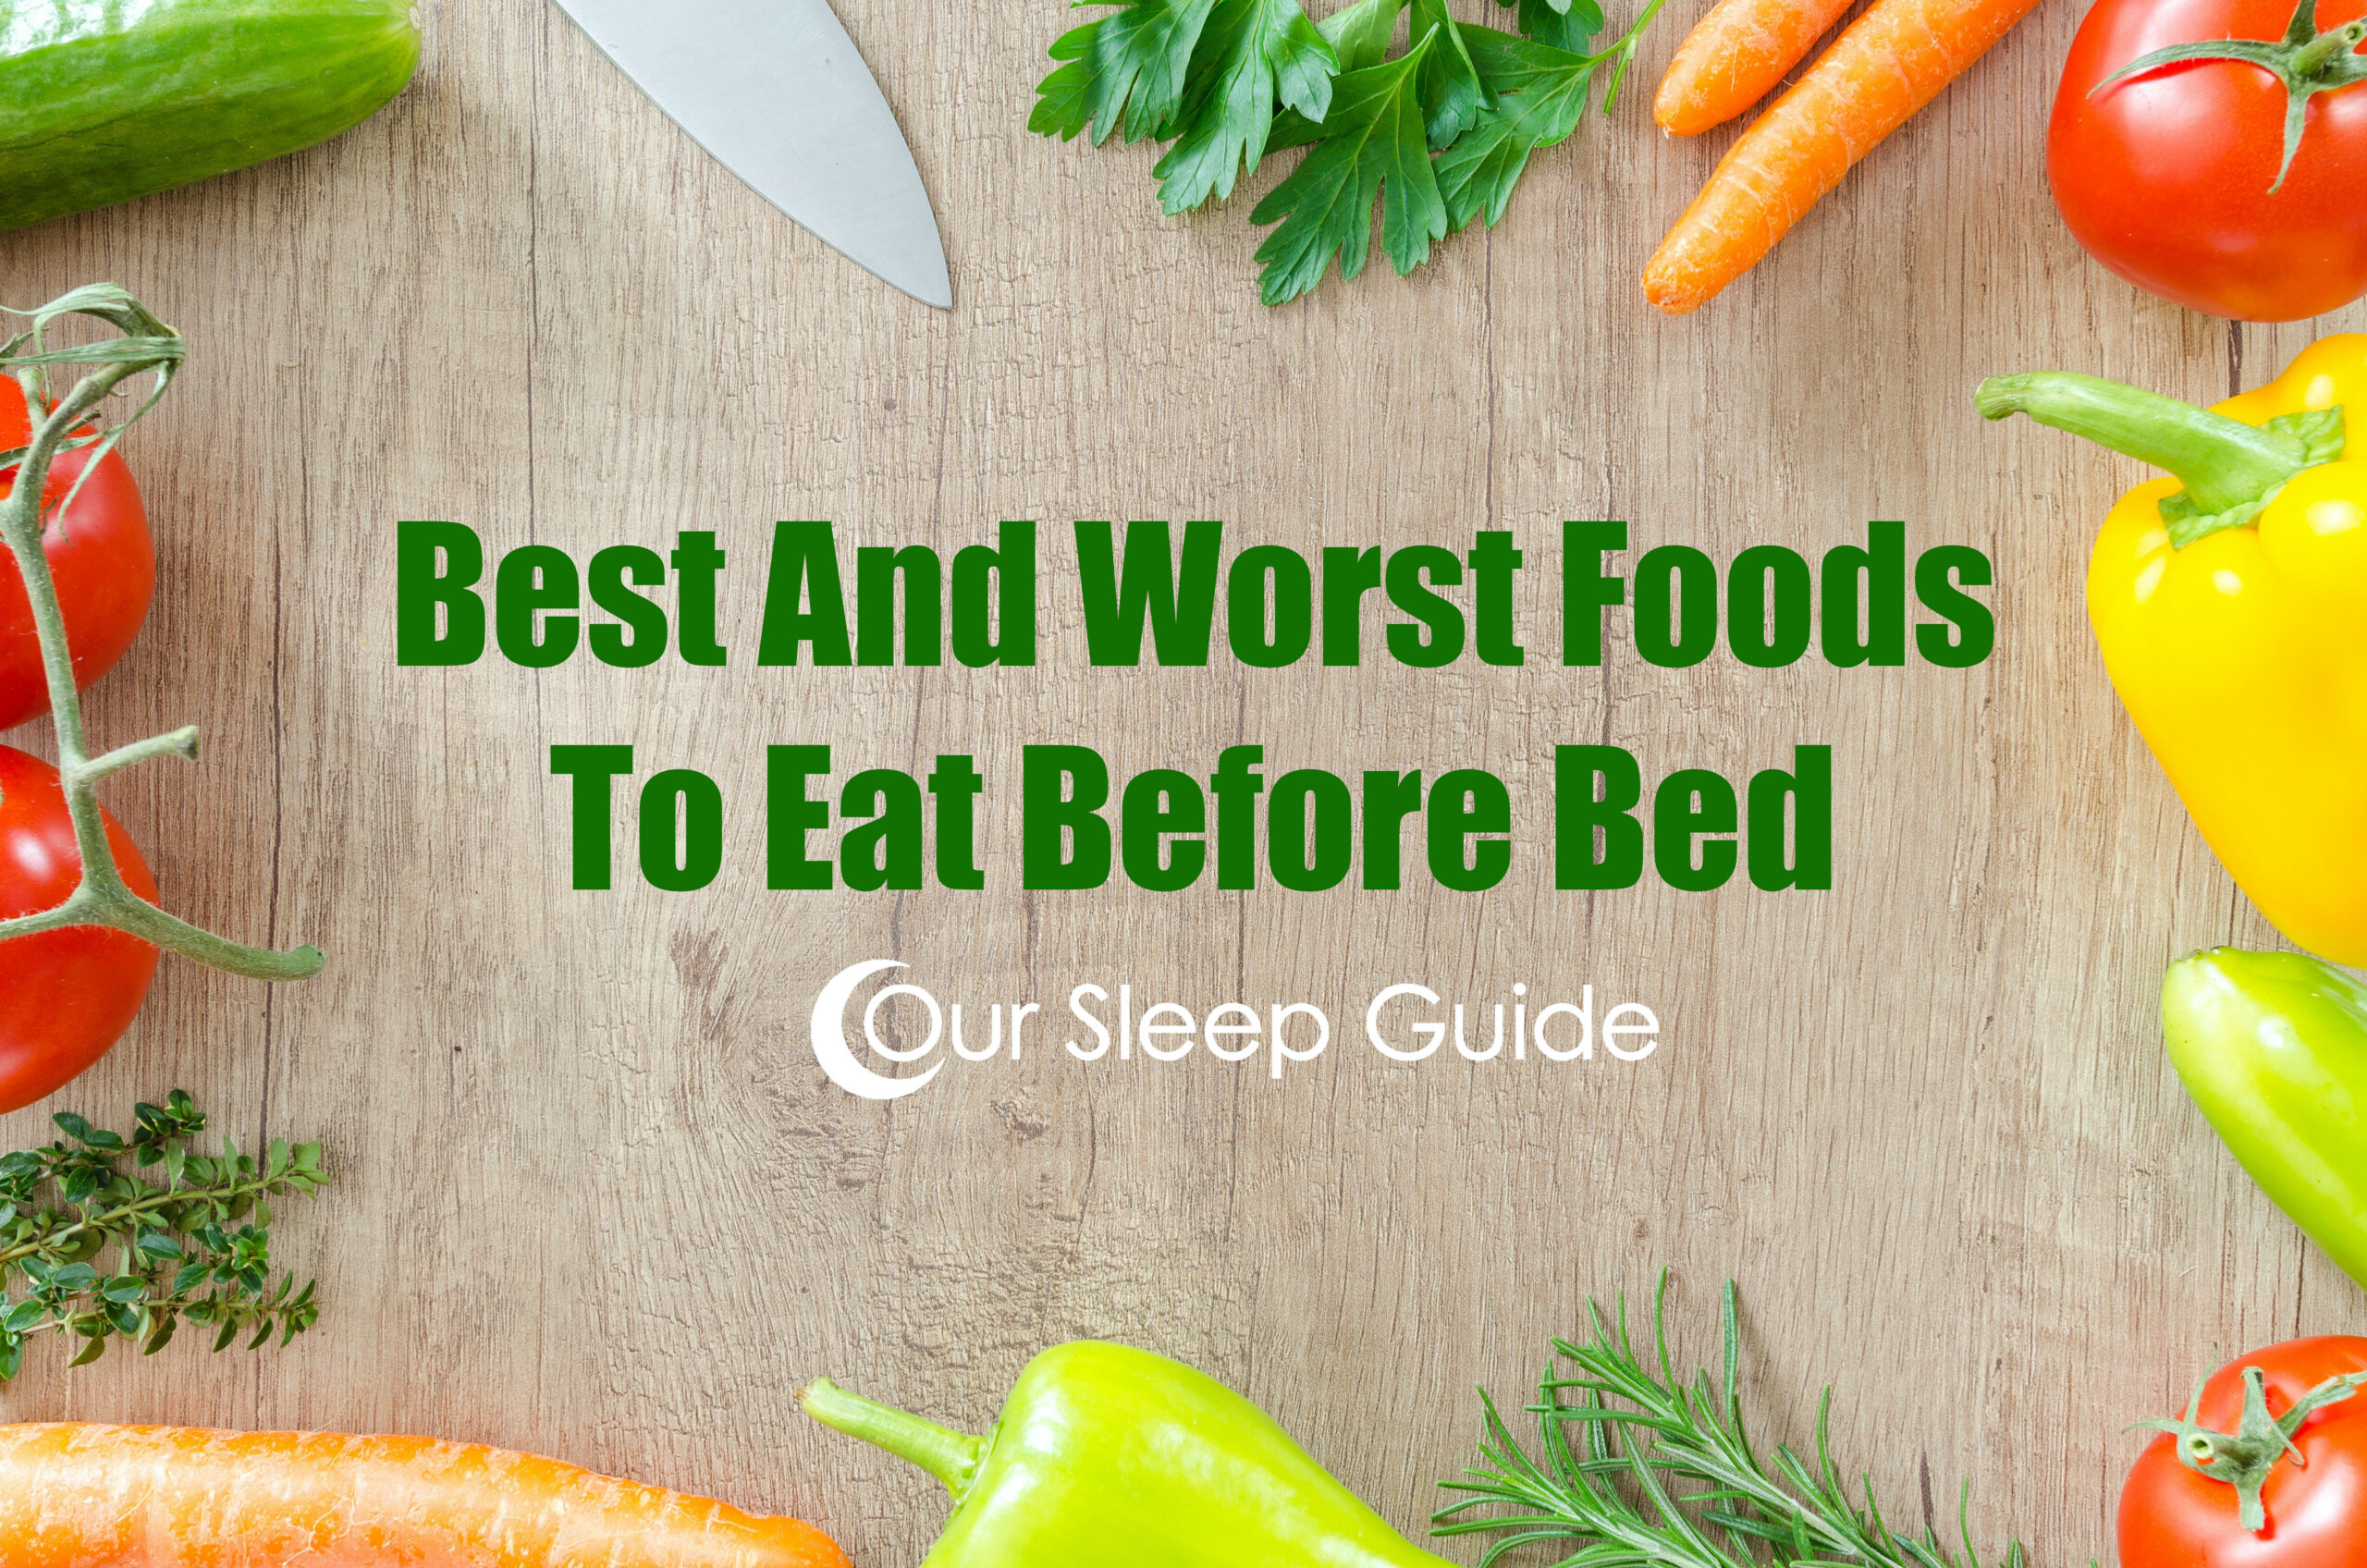 the best and worst foods to eat before bed